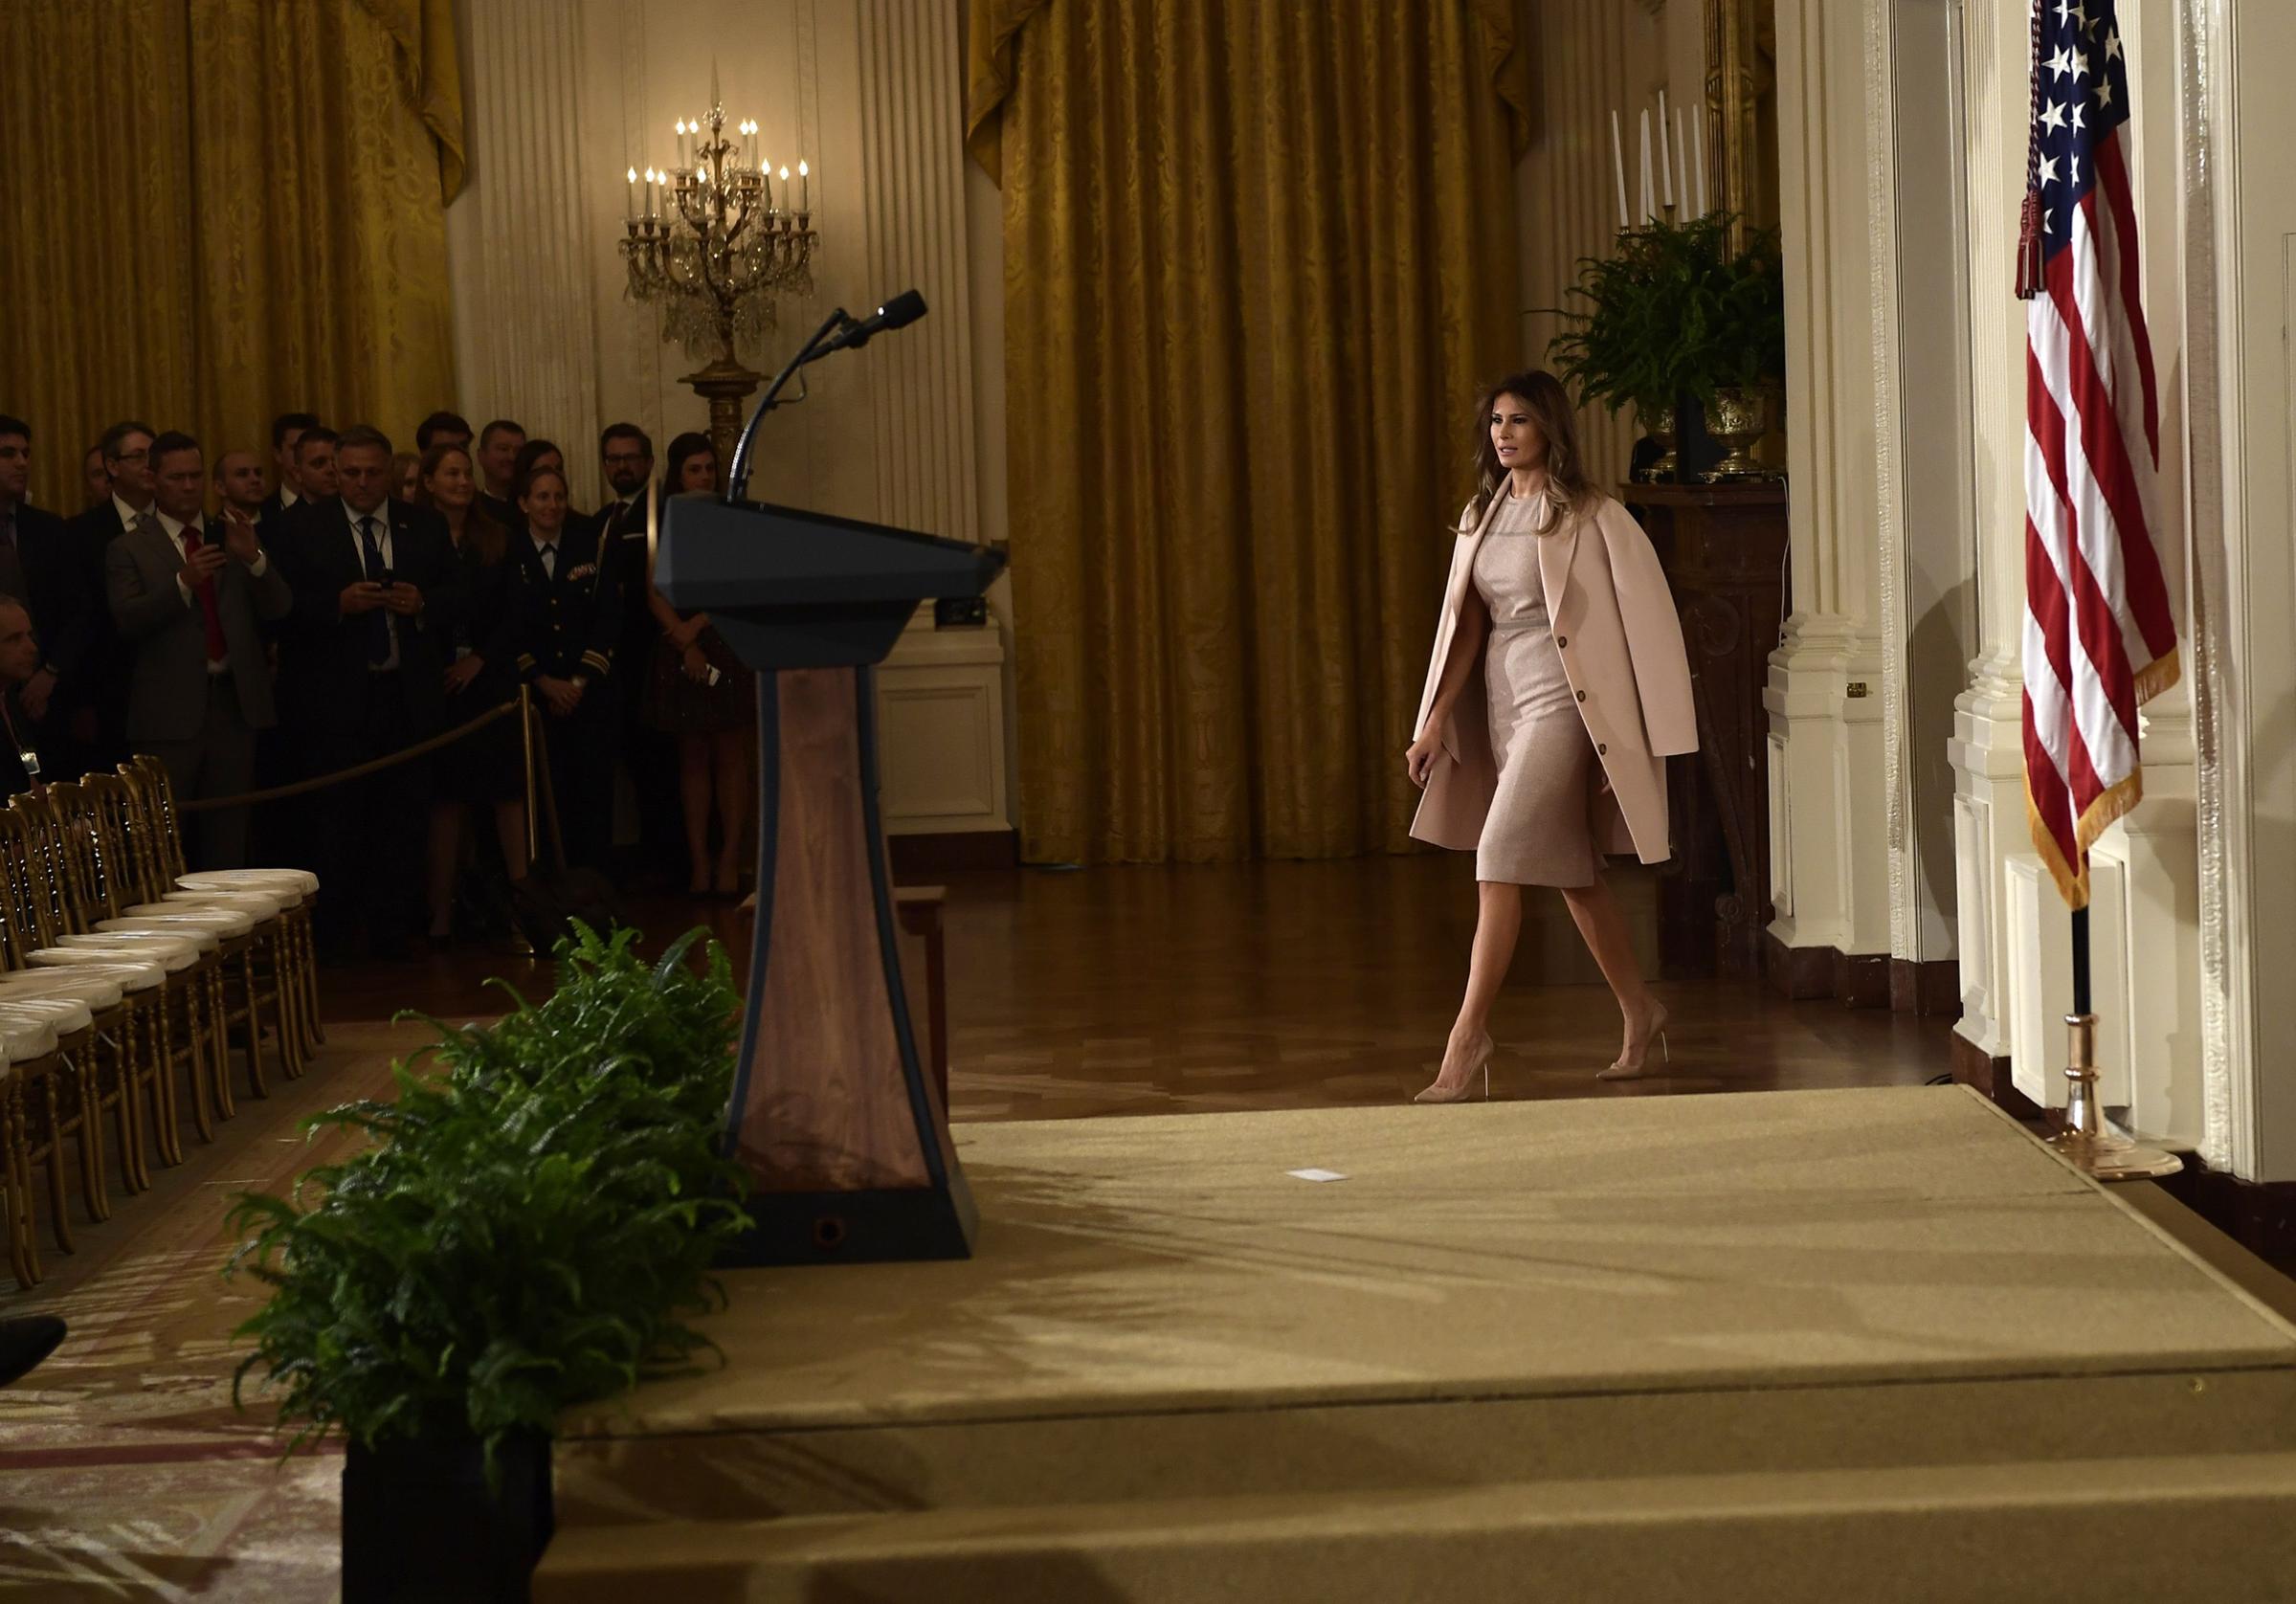 First lady Melania Trump wearing a beige dress and a pale pink coat arrives for an event Oct. 12, 2017 at the White House in Washington, DC.